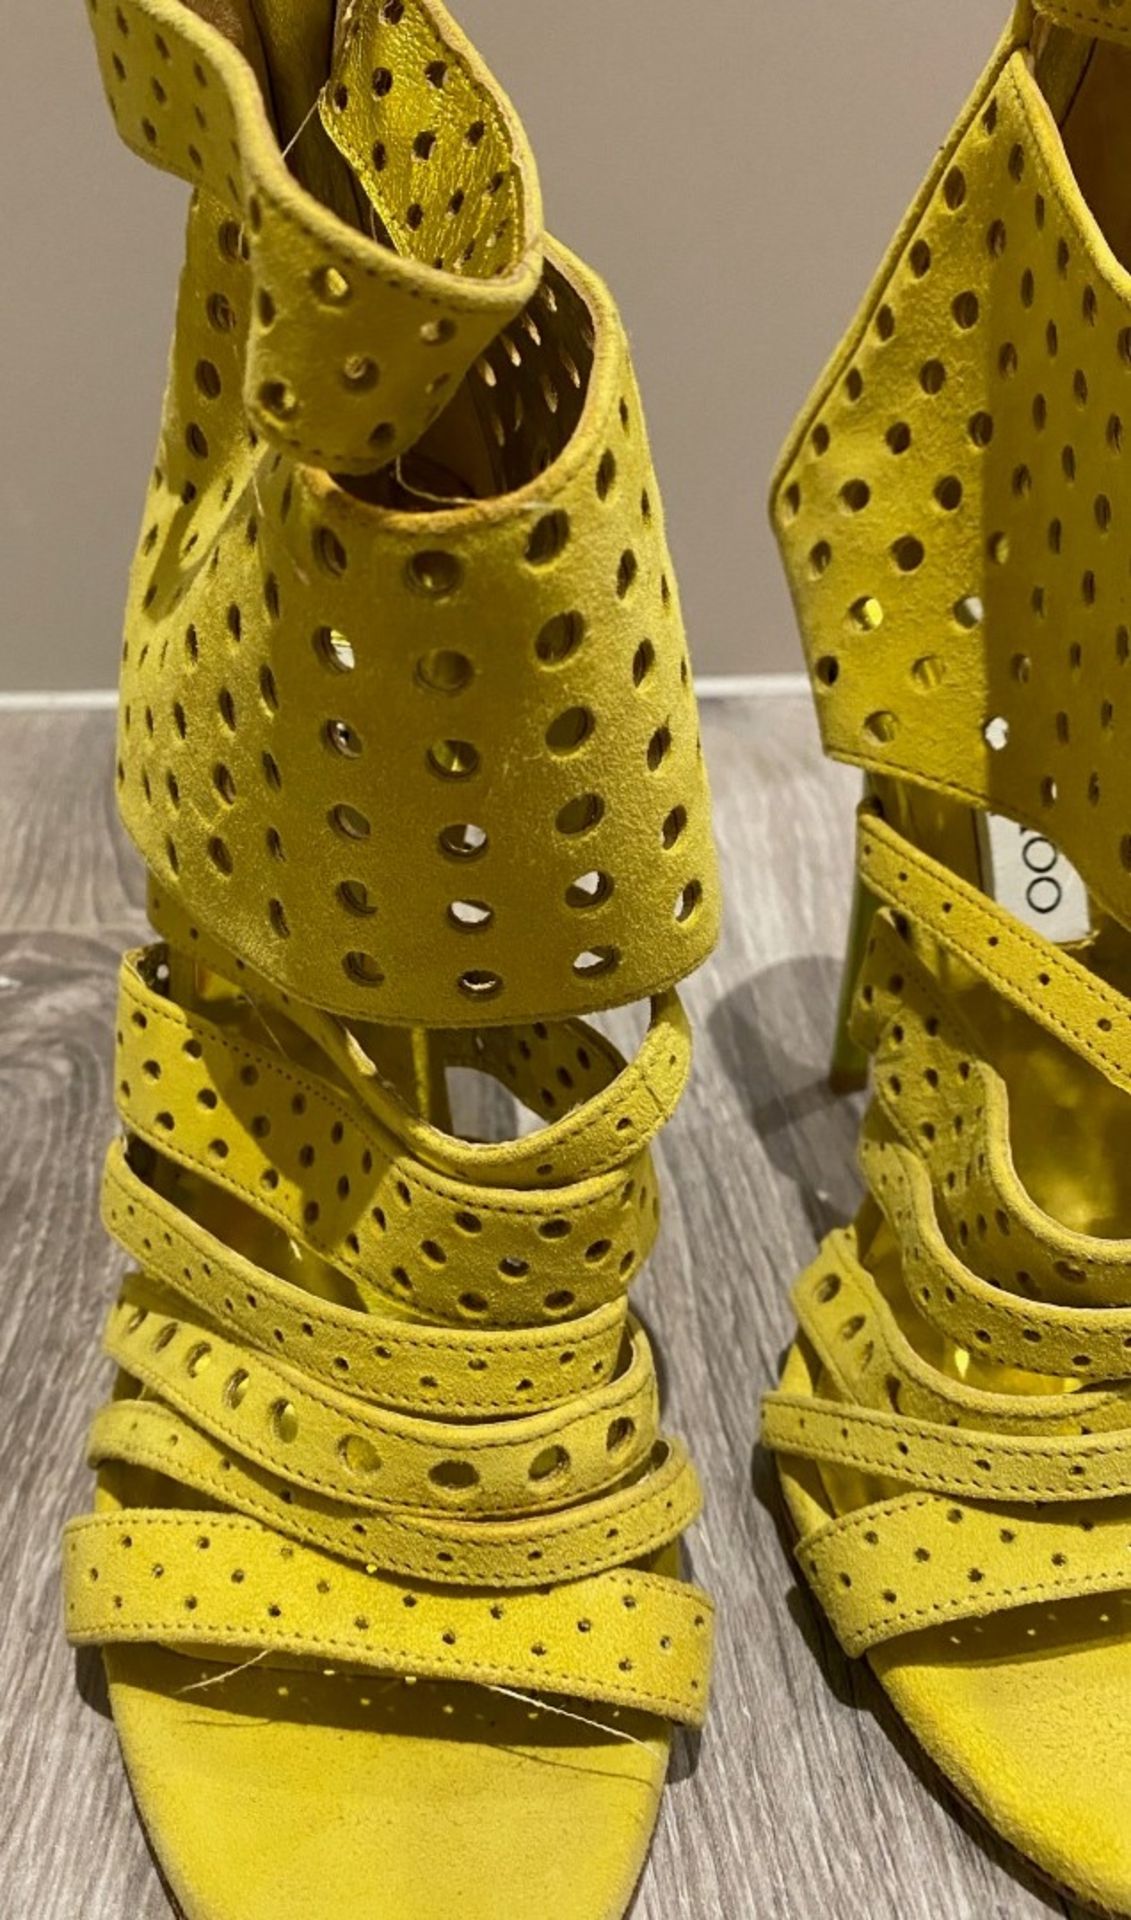 1 x Pair Of Genuine Jimmy Choo High Heel Shoes In Yellow - Size: 36 - Preowned in Very Good Conditio - Image 2 of 4